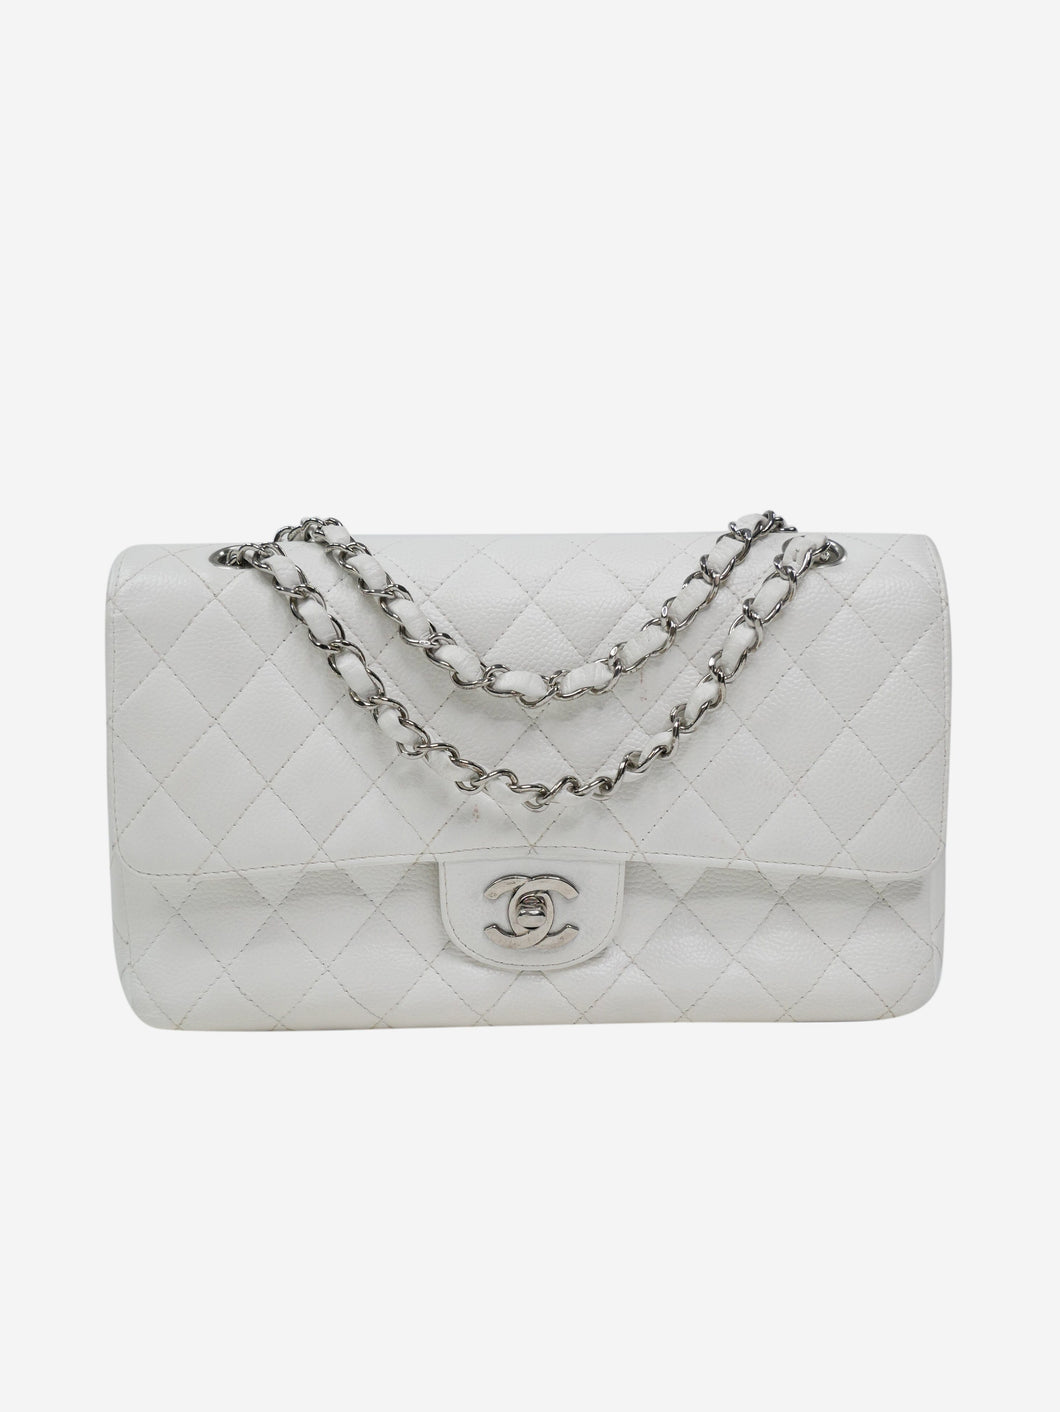 Chanel white medium quilted caviar double flap with silver hardware | SOTT